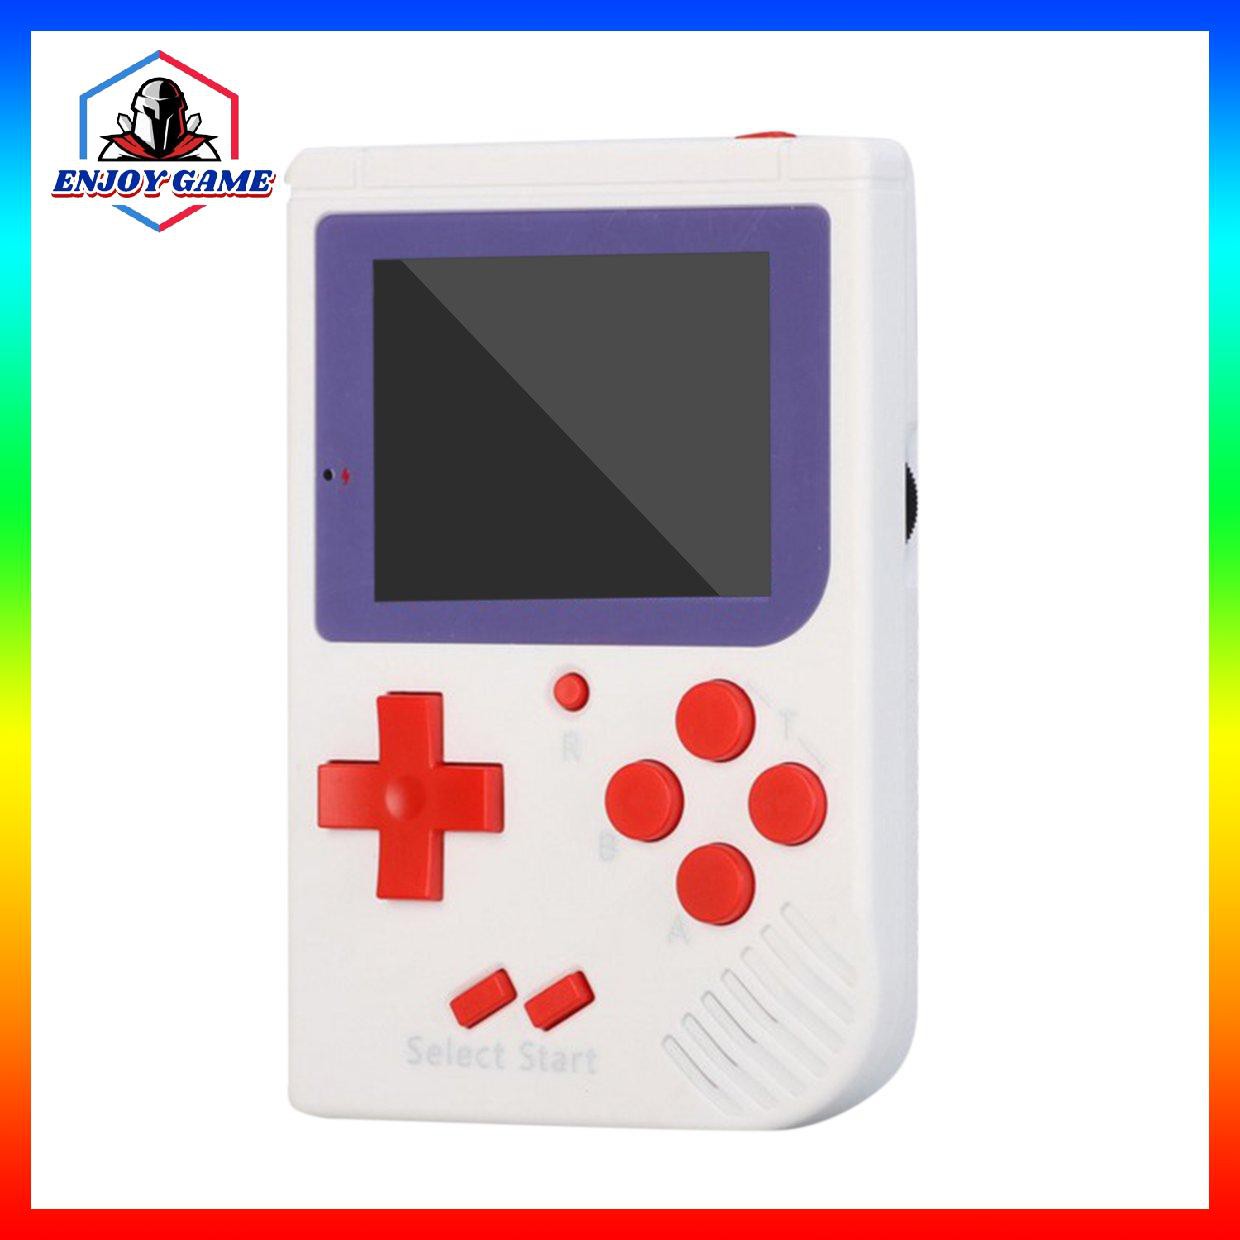 retro gameboy with built in games